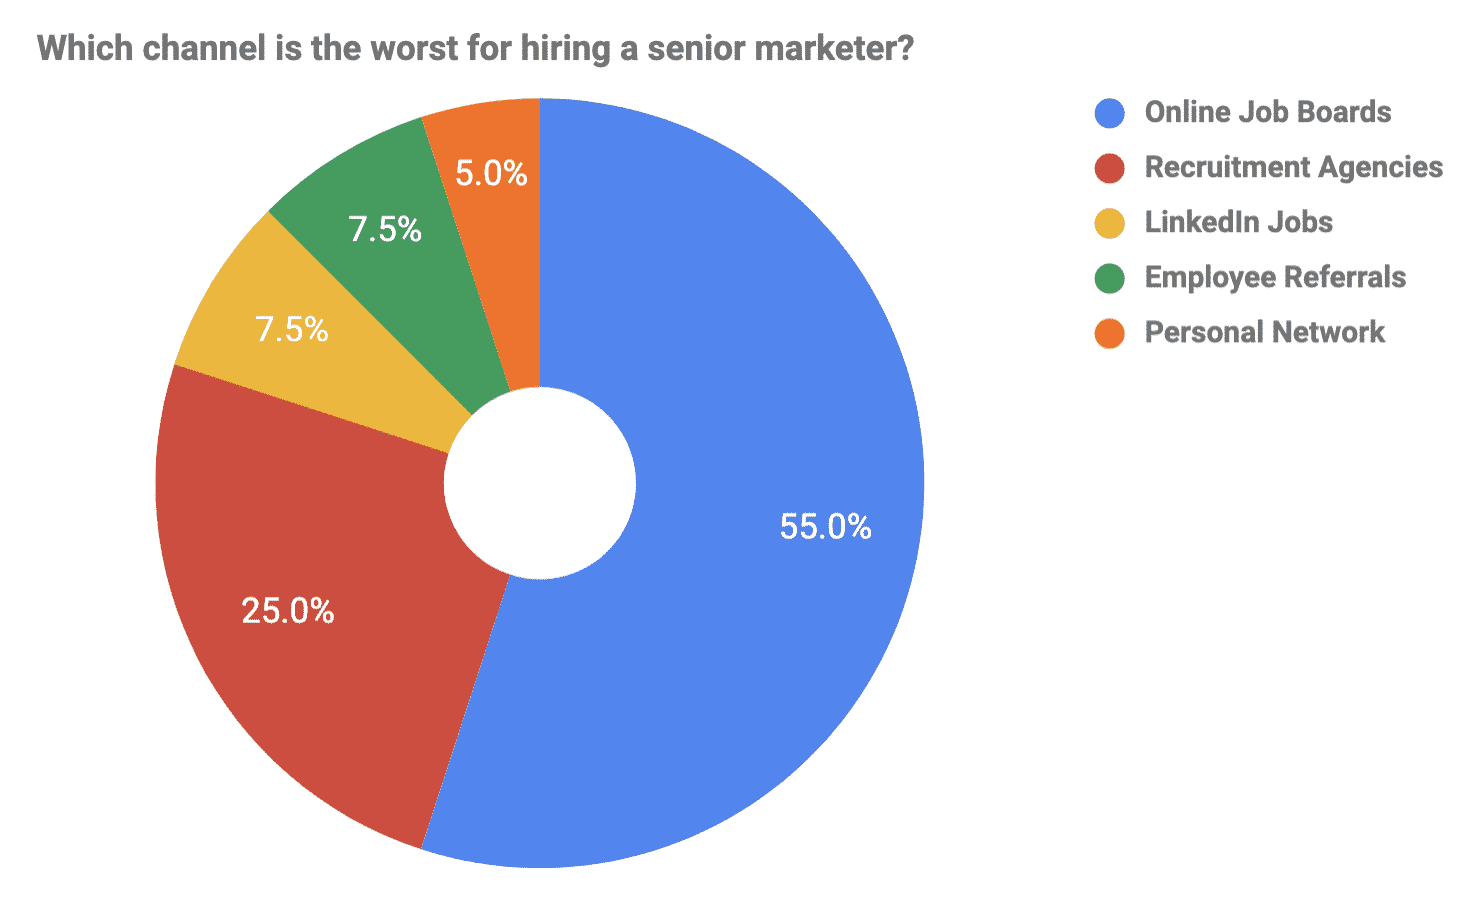 Channel for Hiring Marketers